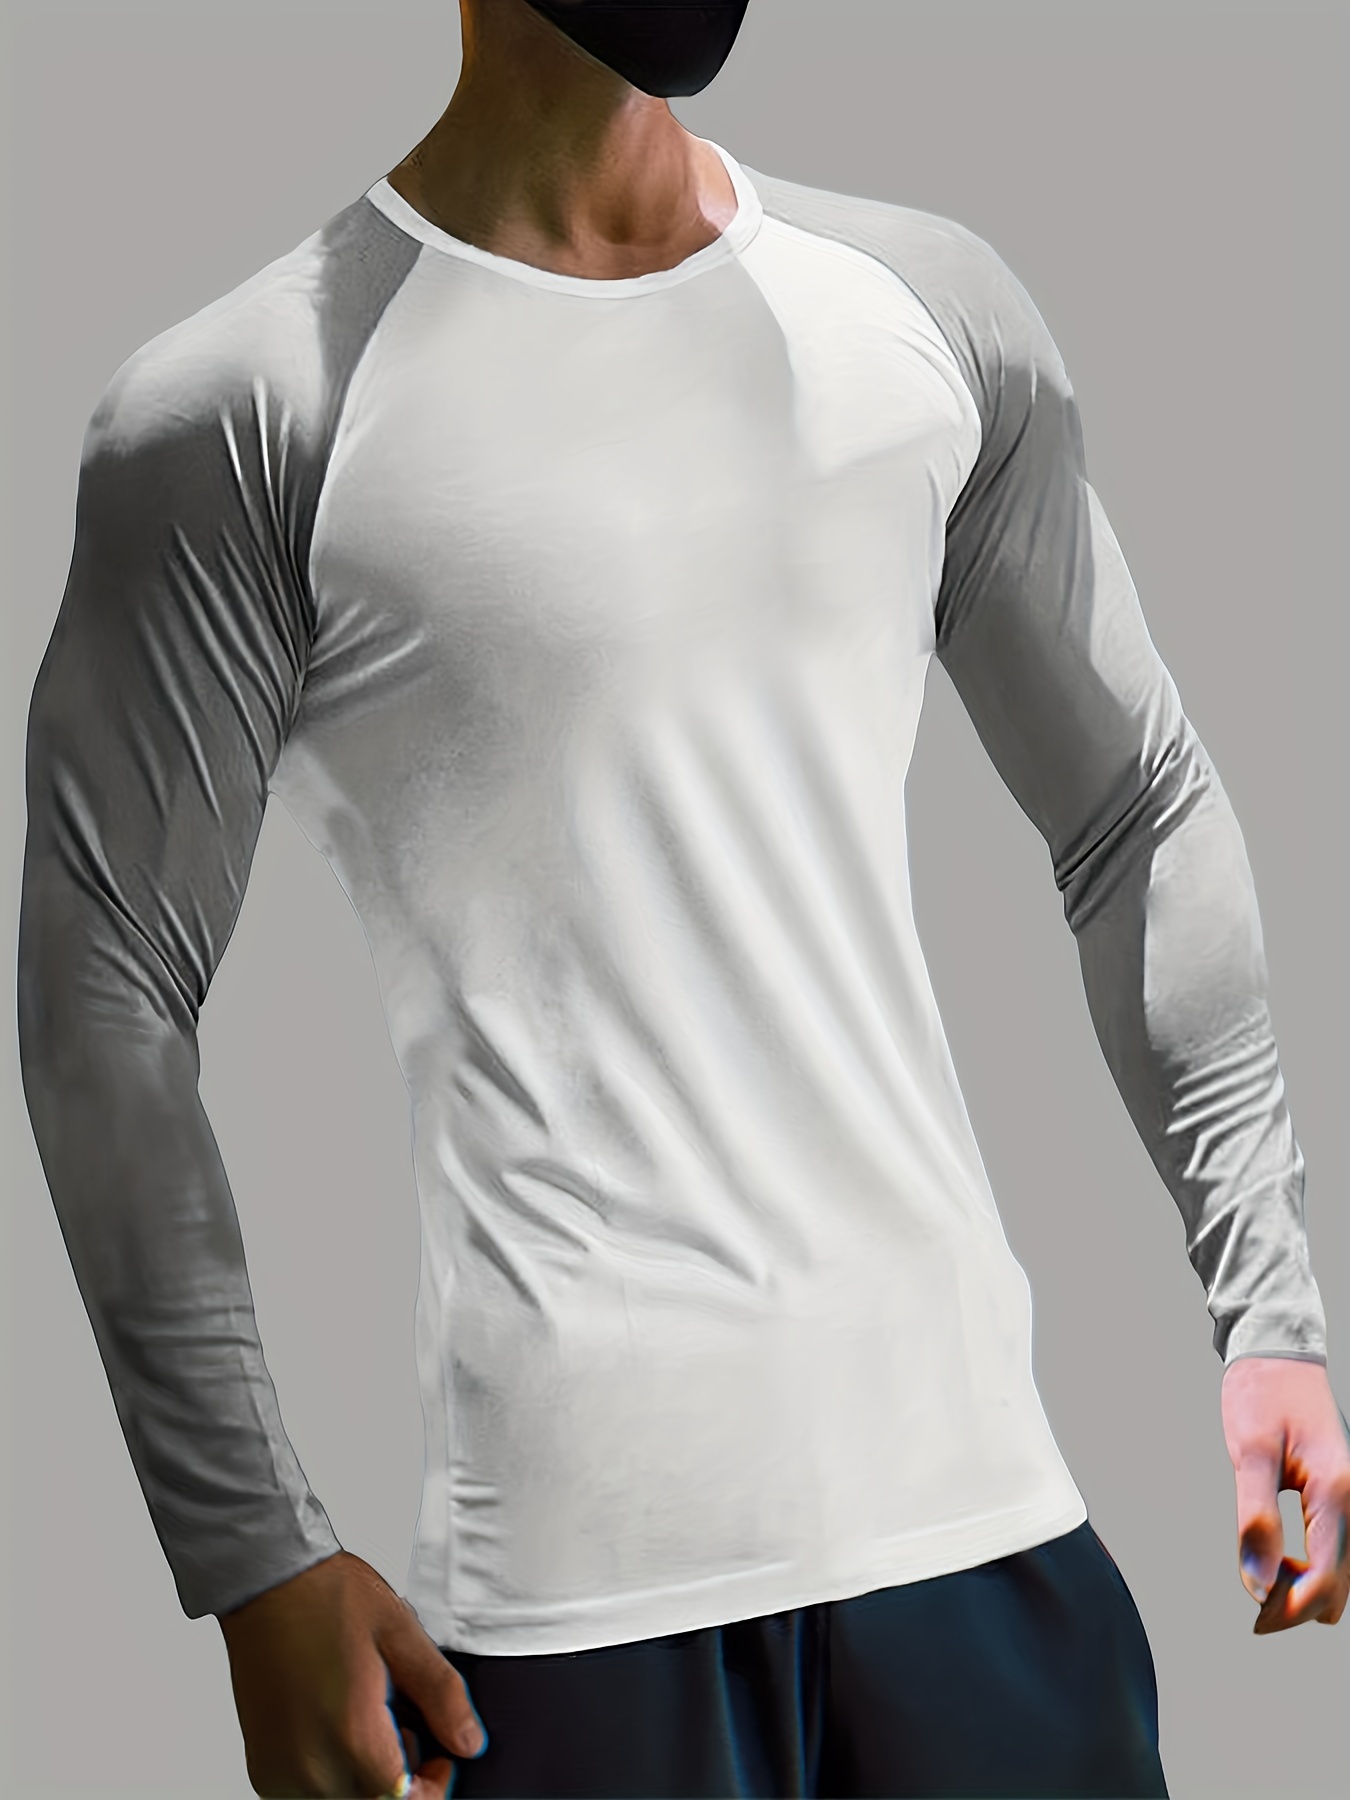 Long Sleeve O-Neck Men's Gym & Fitness T Shirt Price: 33.46 & FREE Shipping